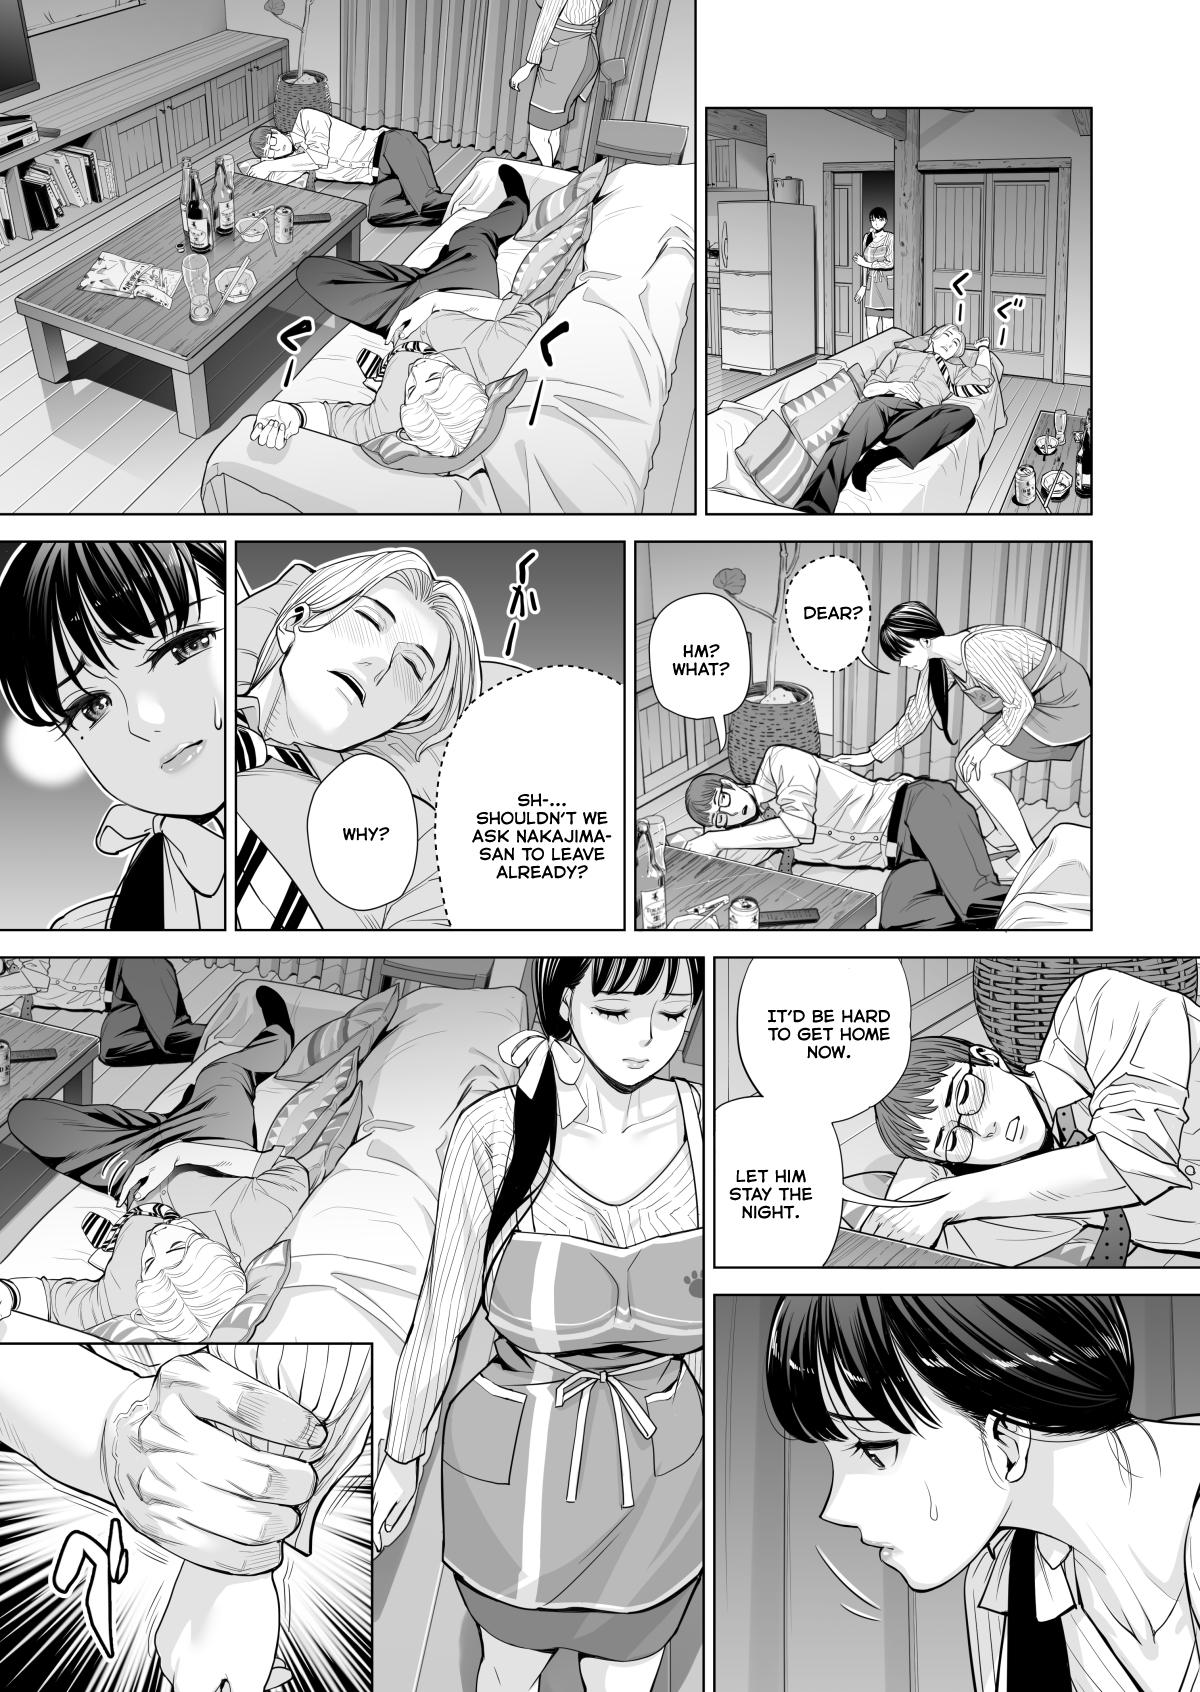 [HGT Lab (Tsusauto)] Tsukiyo no Midare Zake (Zenpen) Moonlit Intoxication ~ A Housewife Stolen by a Coworker Besides her Blackout Drunk Husband ~ Chapter 1 [English] 37